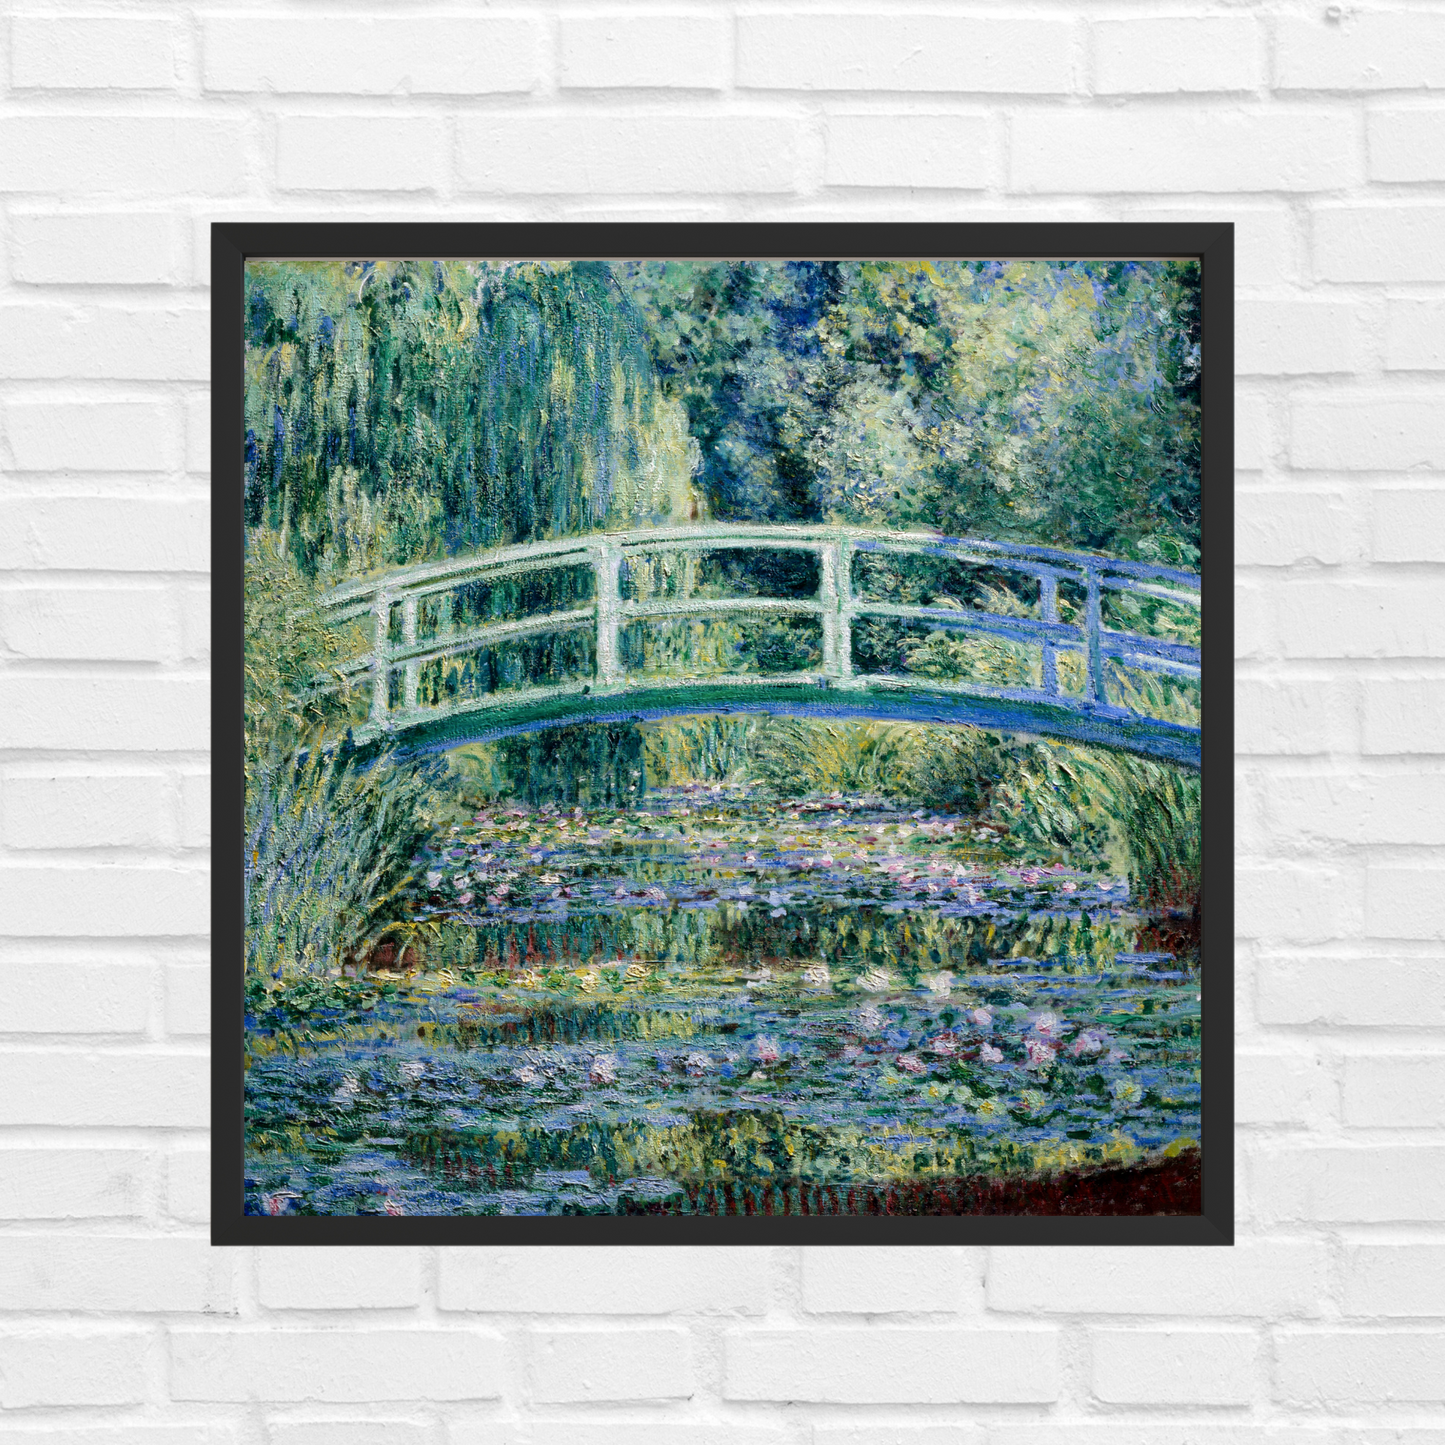 Water Lilies and Japanese Bridge by Claude Monet (1899) - Think Big Dream Big Publishing